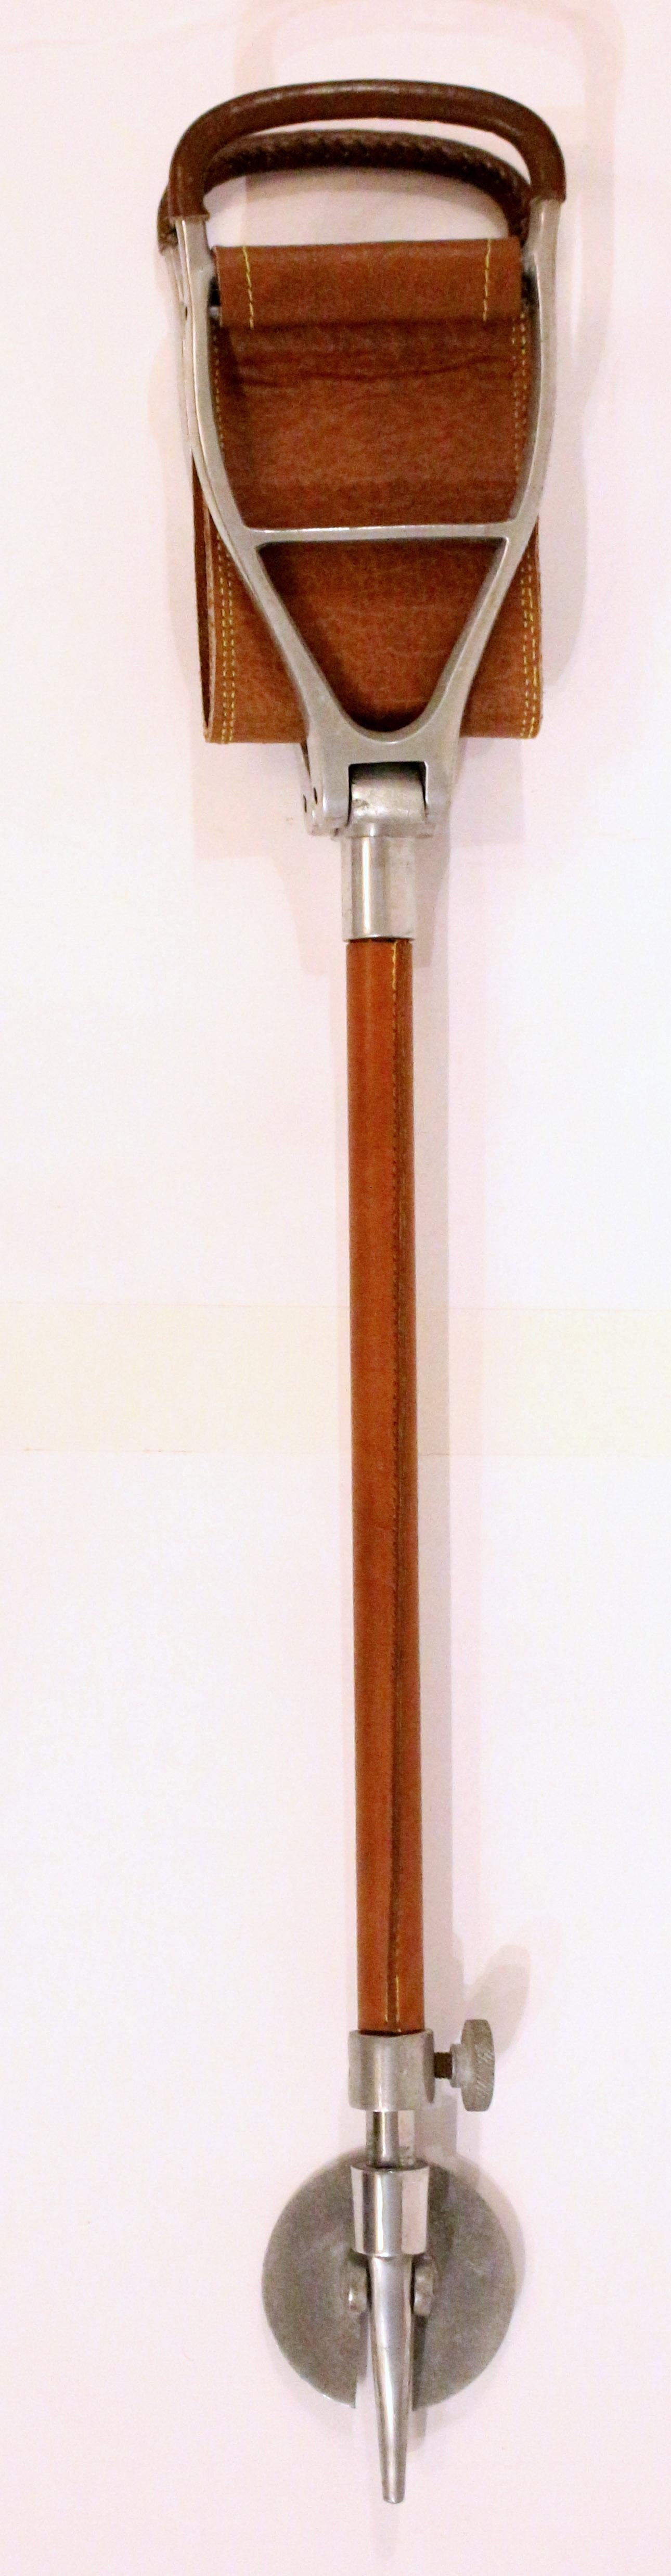 Circa 1960 English sporting event or hunting walking stick with folding seat. Steel; the handles & shaft wrapped in leather, leather seat. Adjustable height for comfortable seating. 31